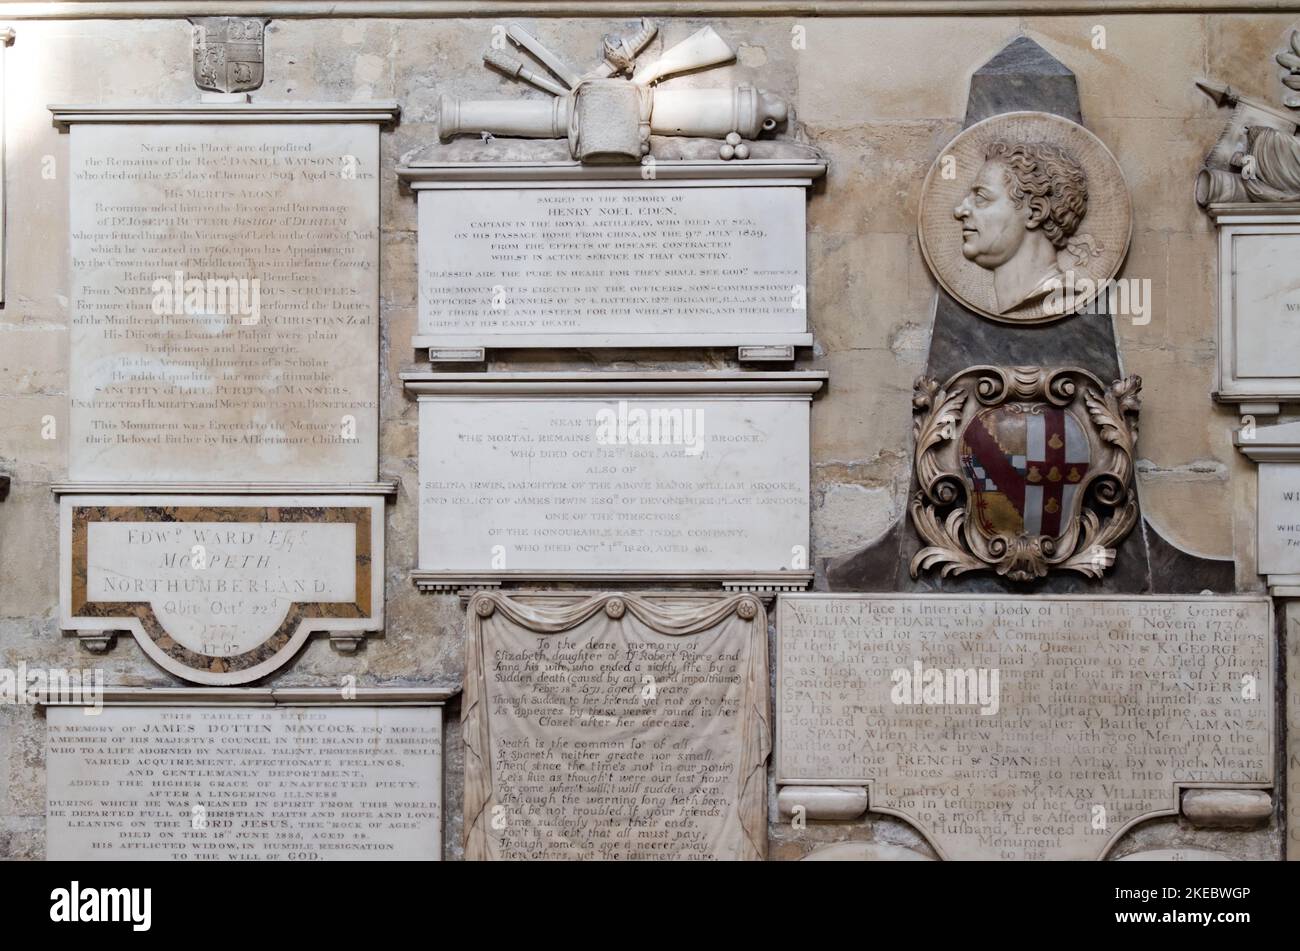 Marble,Stone Memorials On The Wall Of Bath Abbey, The Abbey Church Of Saint Peter And Saint Paul, Bath UK Stock Photo